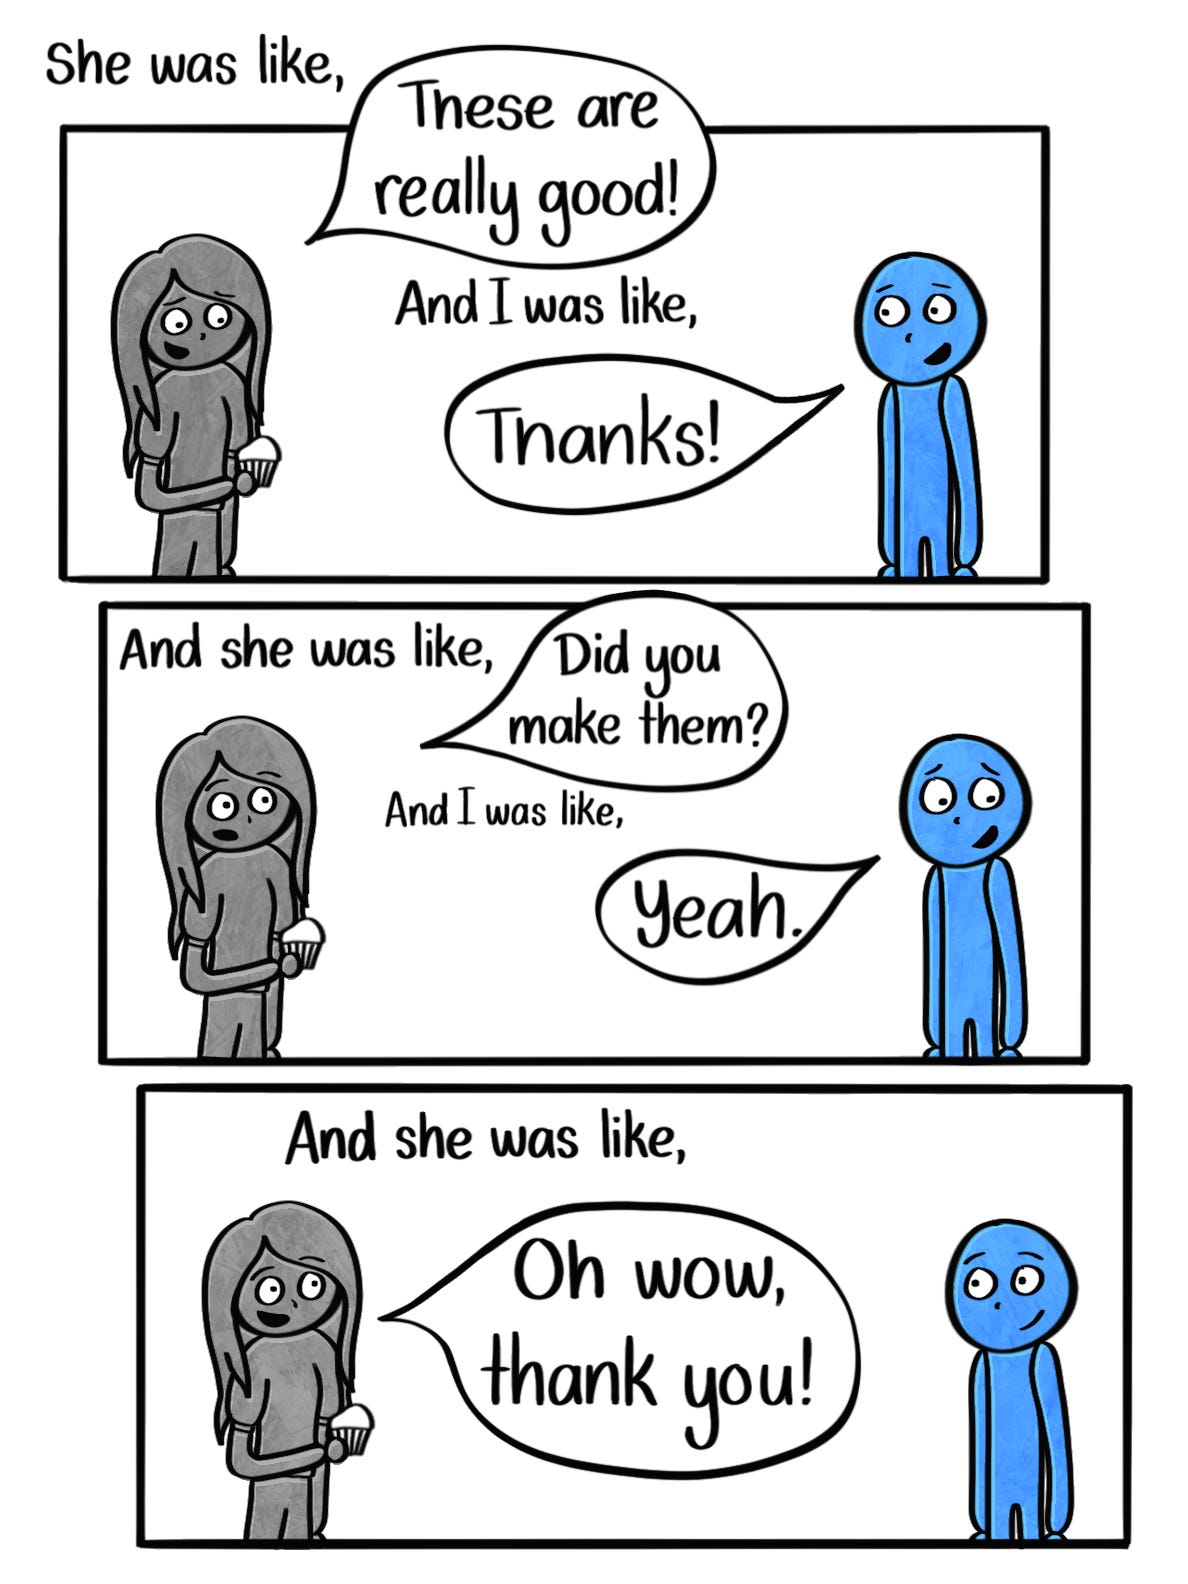 Caption: She was like, "These are really good!" And I was like, "Thanks." And she was like, "Did you make them?" And I was like, "Yeah." And she was like, "Oh wow, thank you!" Image: Three panels of the blue person and the woman talking, with speech bubbles around the quoted parts. 